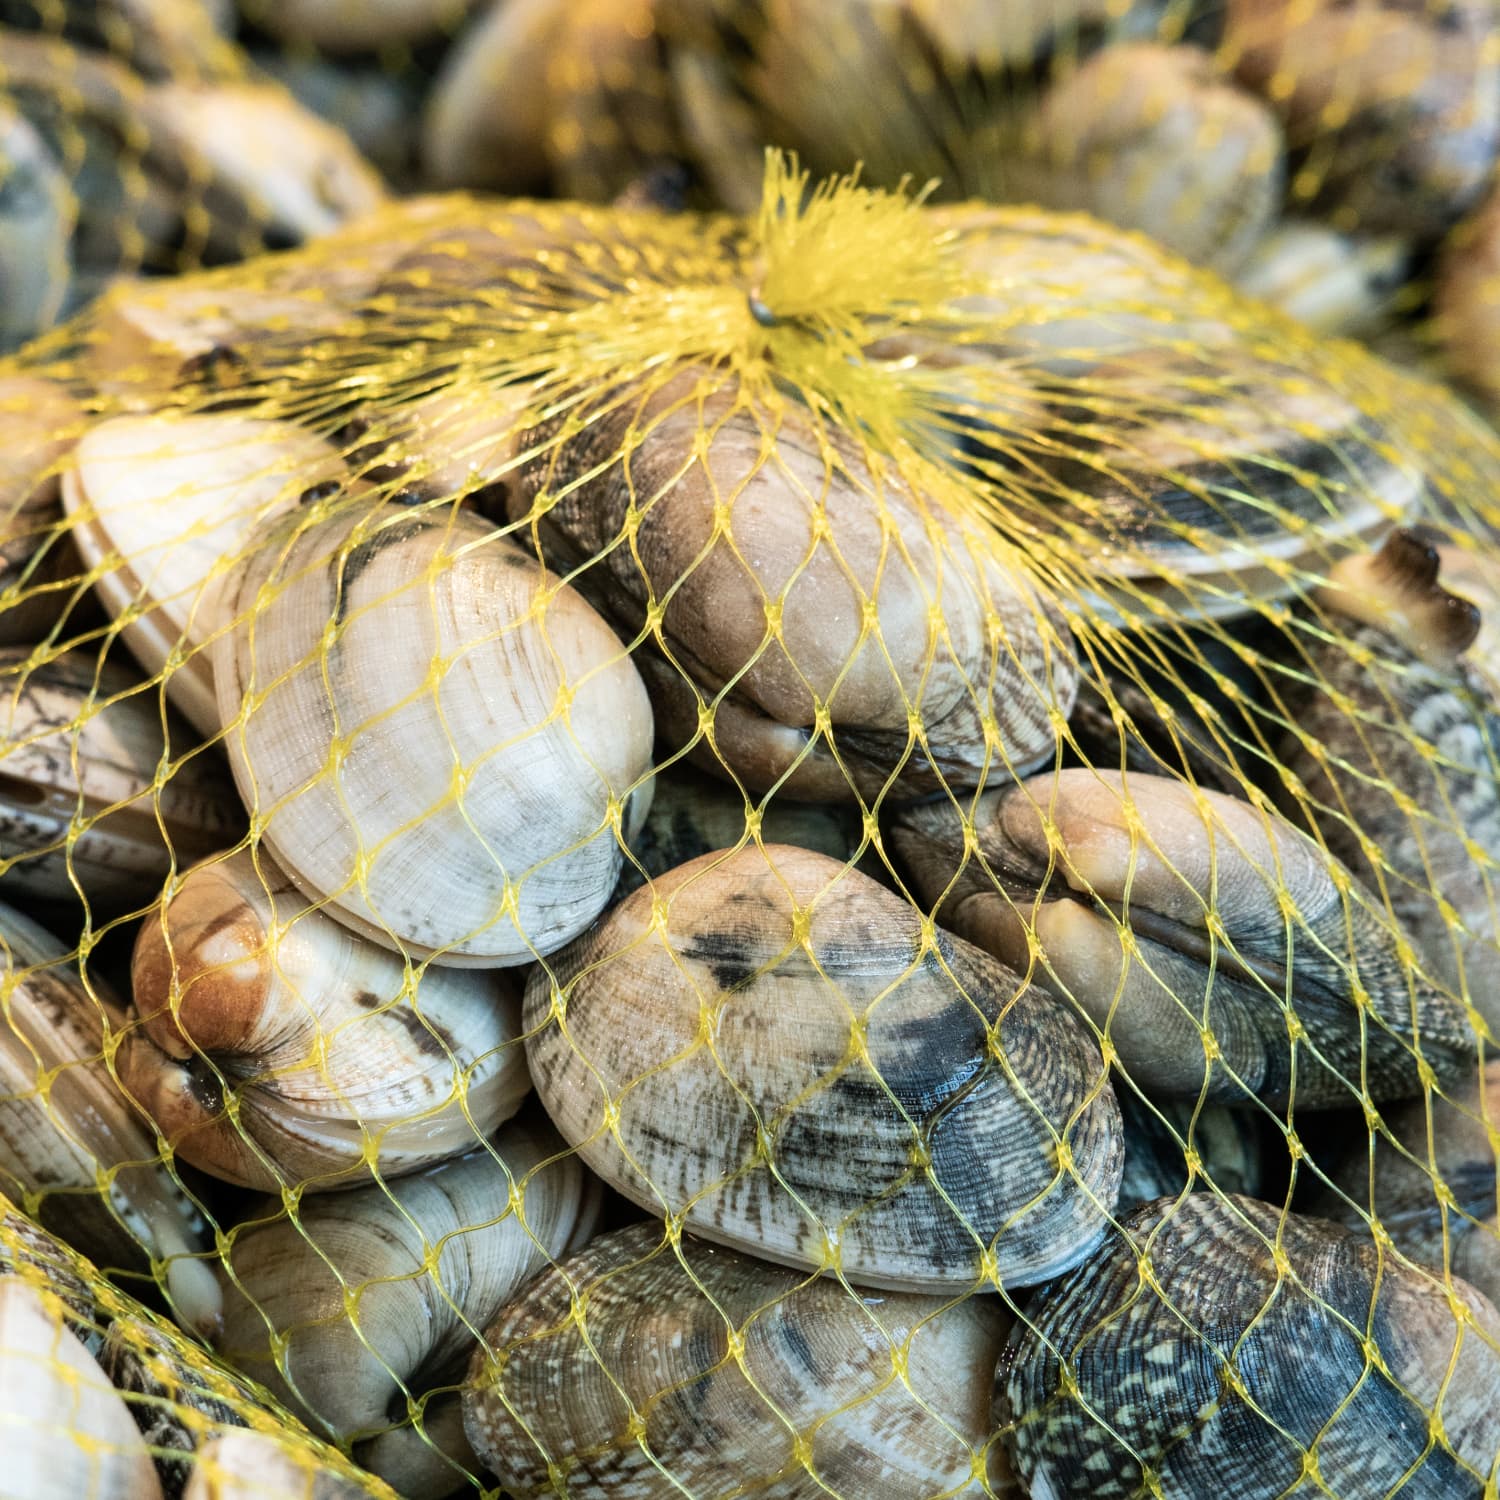 How To Clean Clams